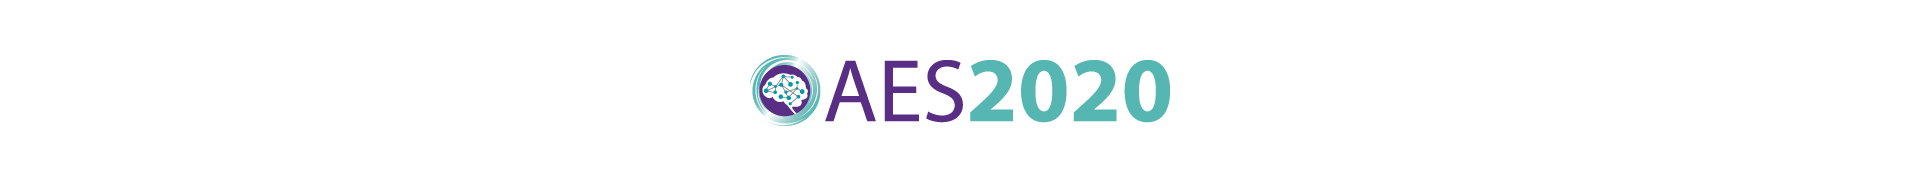 AES2020 Event Banner